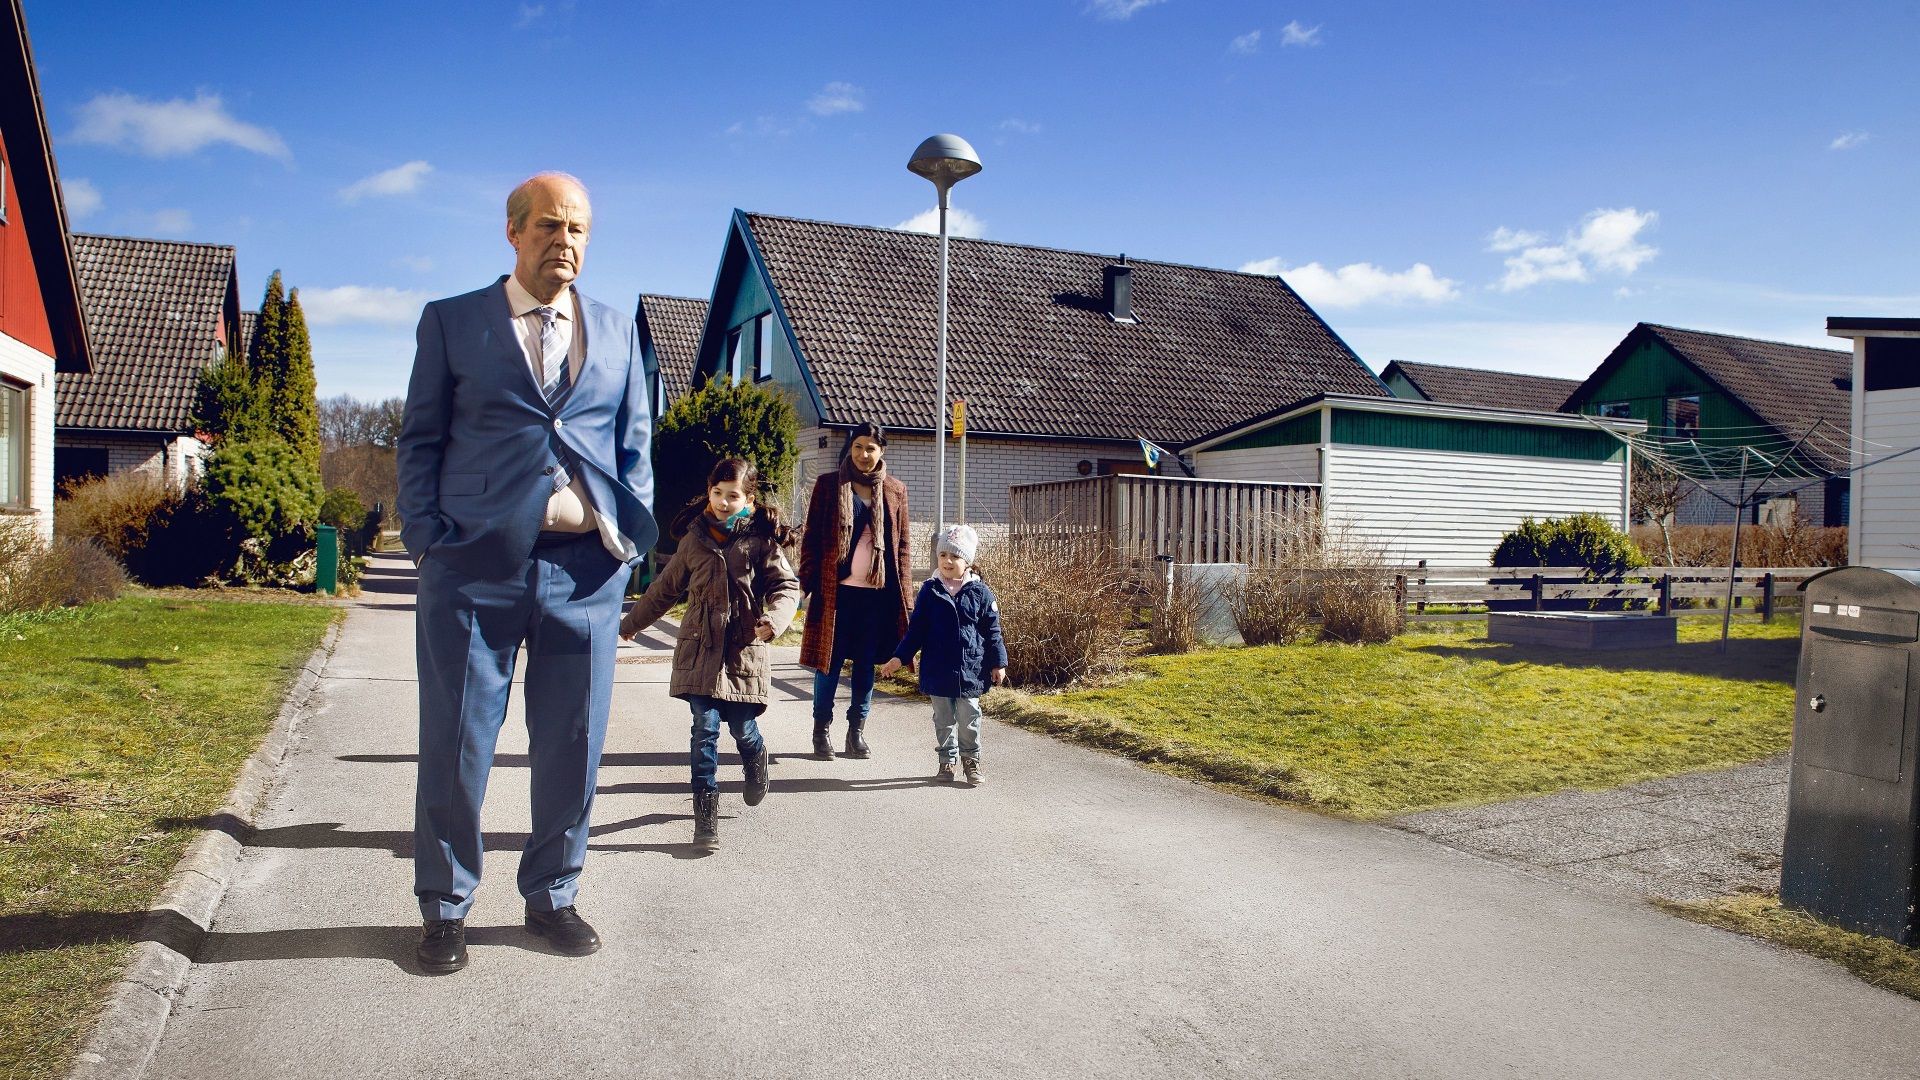 A Man Called Ove background